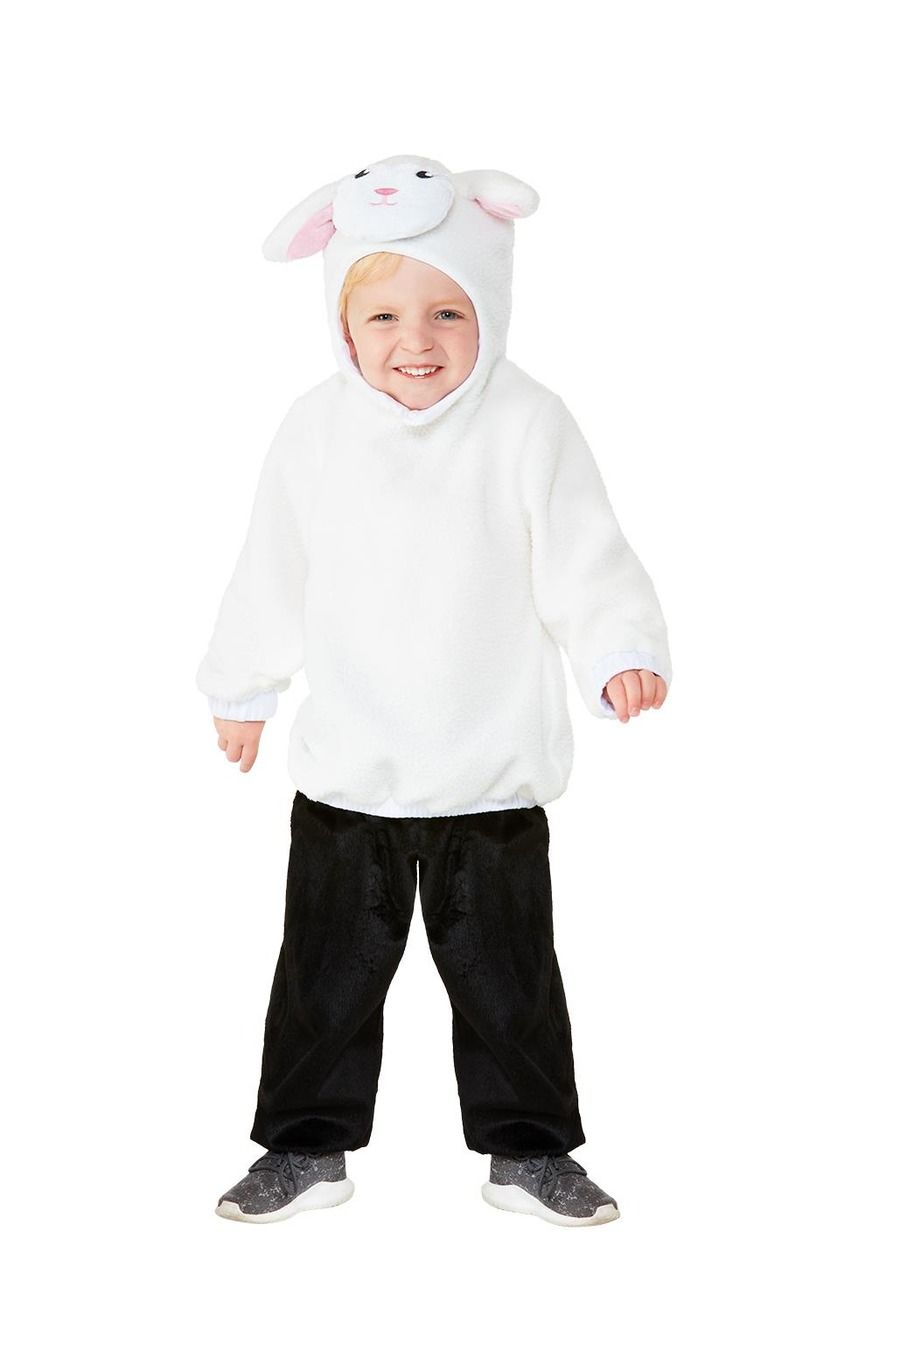 Toddlers Easter Costume